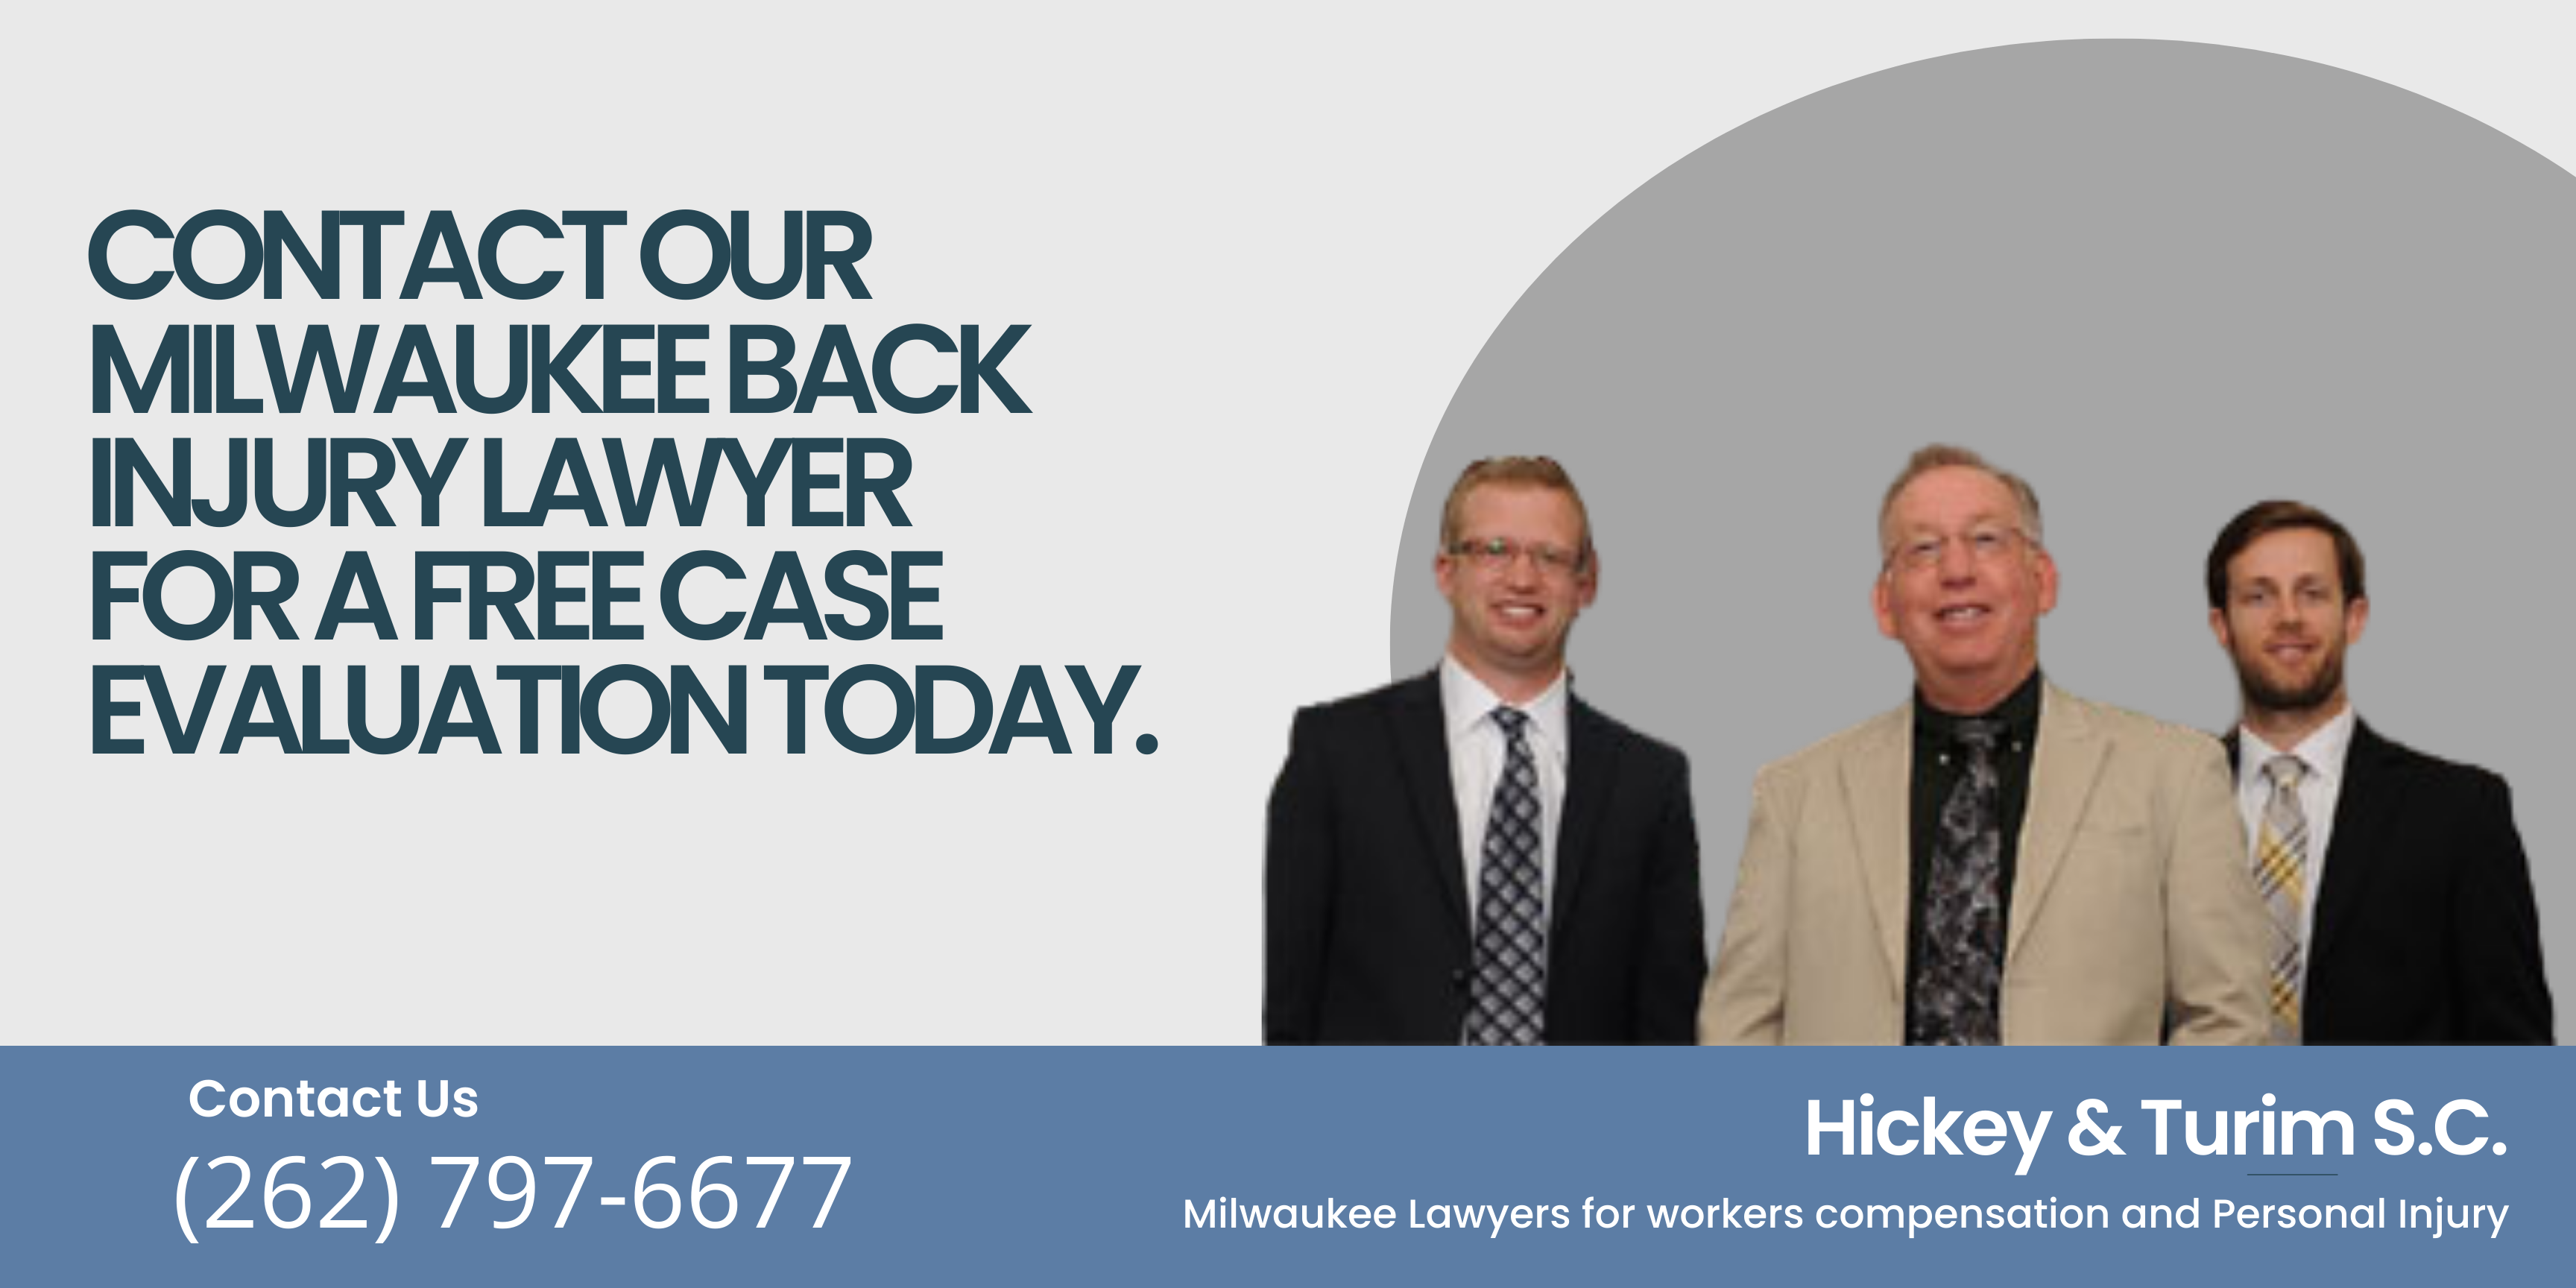 Contact our Milwaukee Back Injury Lawyer